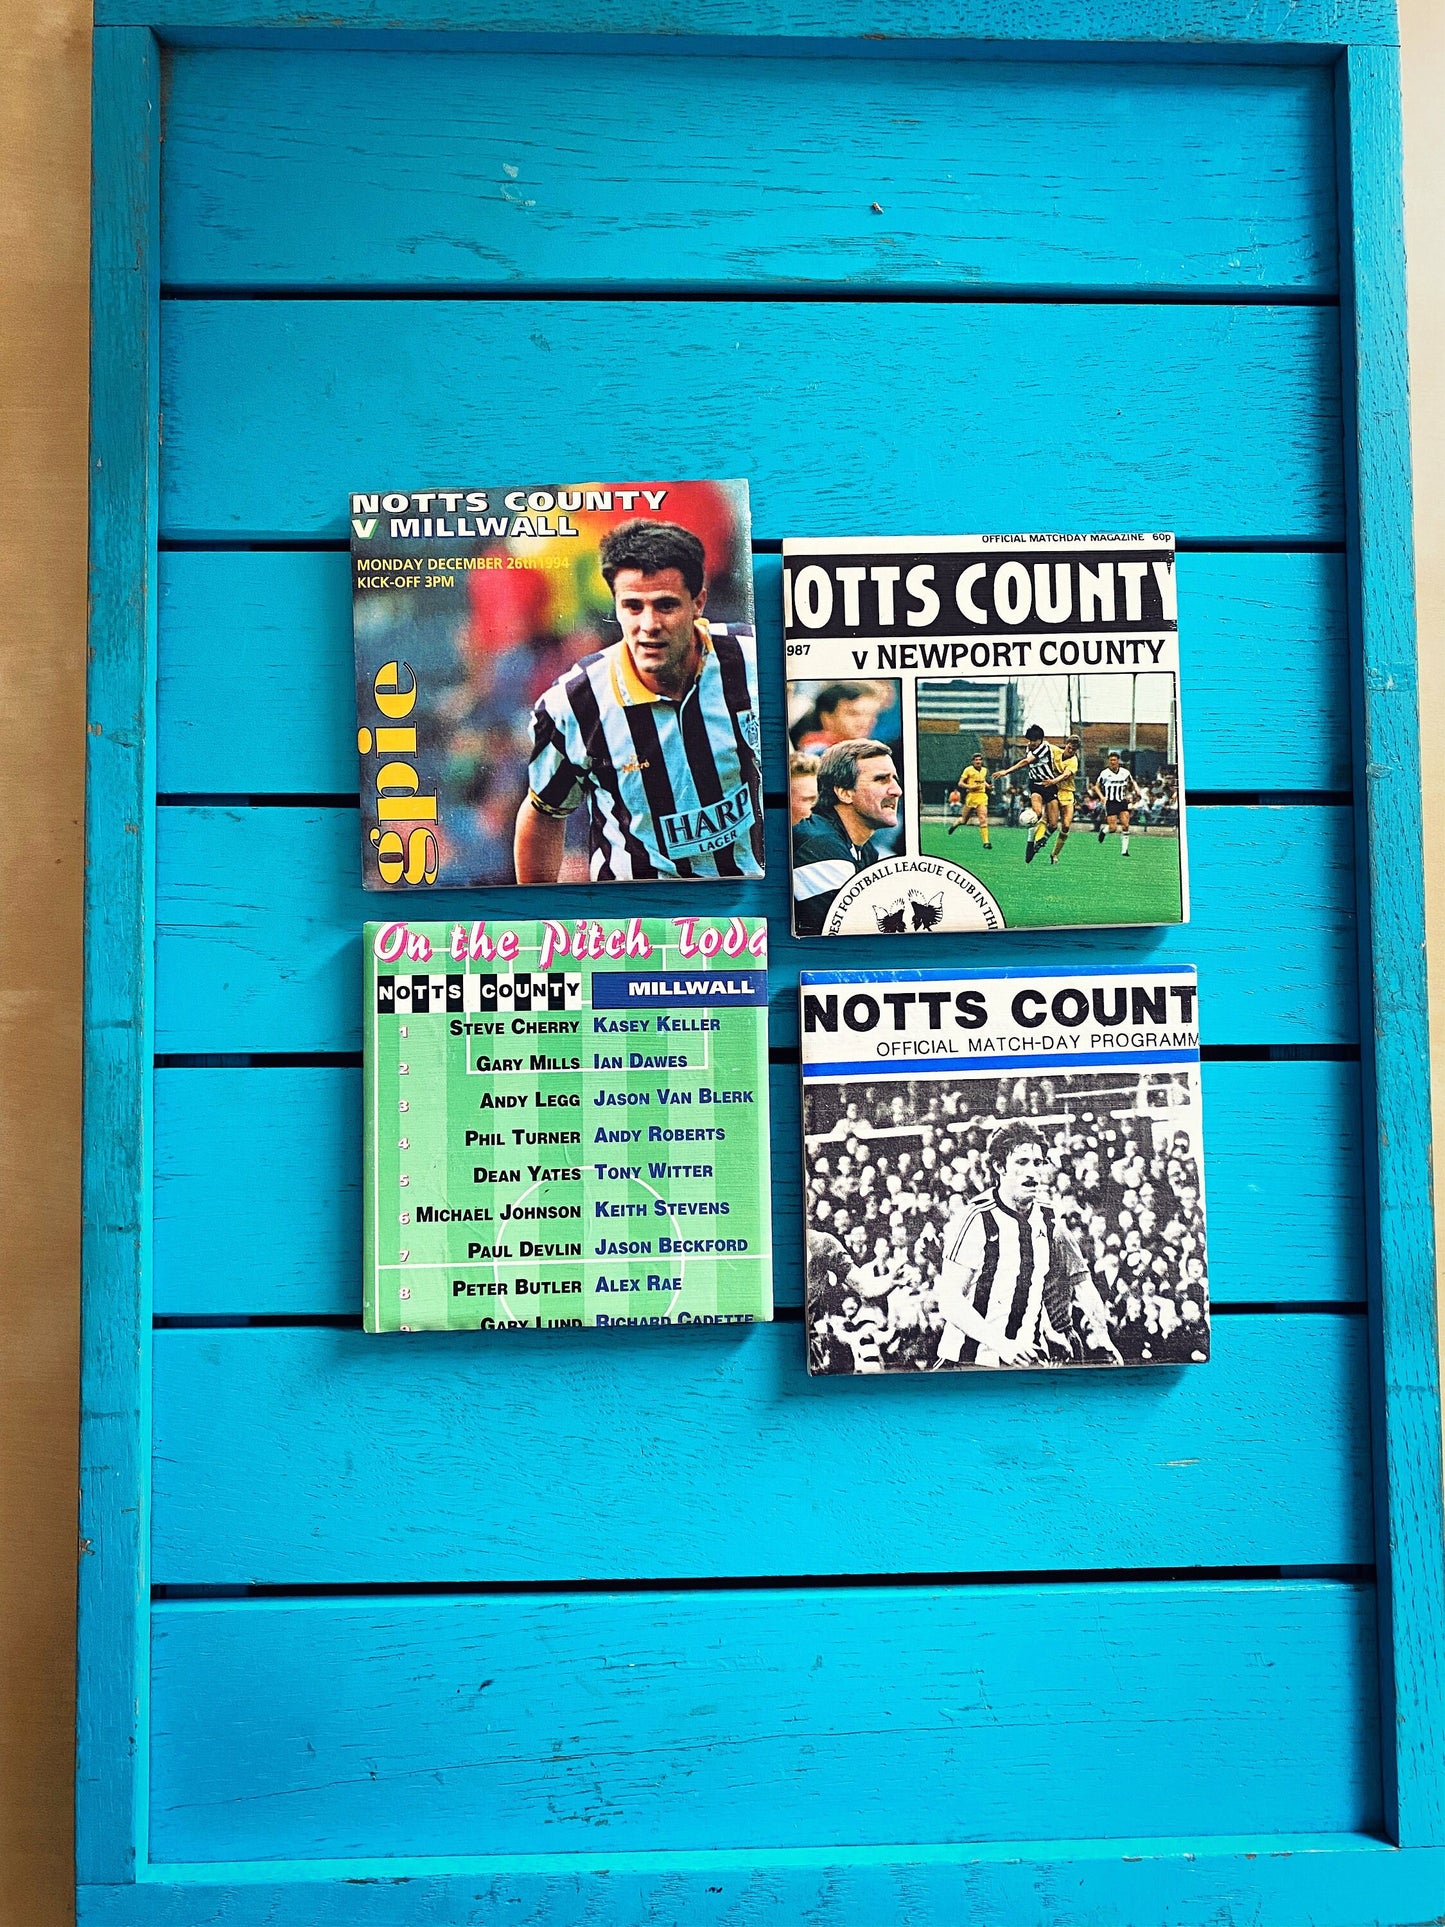 Vintage Notts County Football Programme Coasters. Upcycled Football Gift. Man Cave Home Decor. Retro Football Gift for Dad. Nottingham